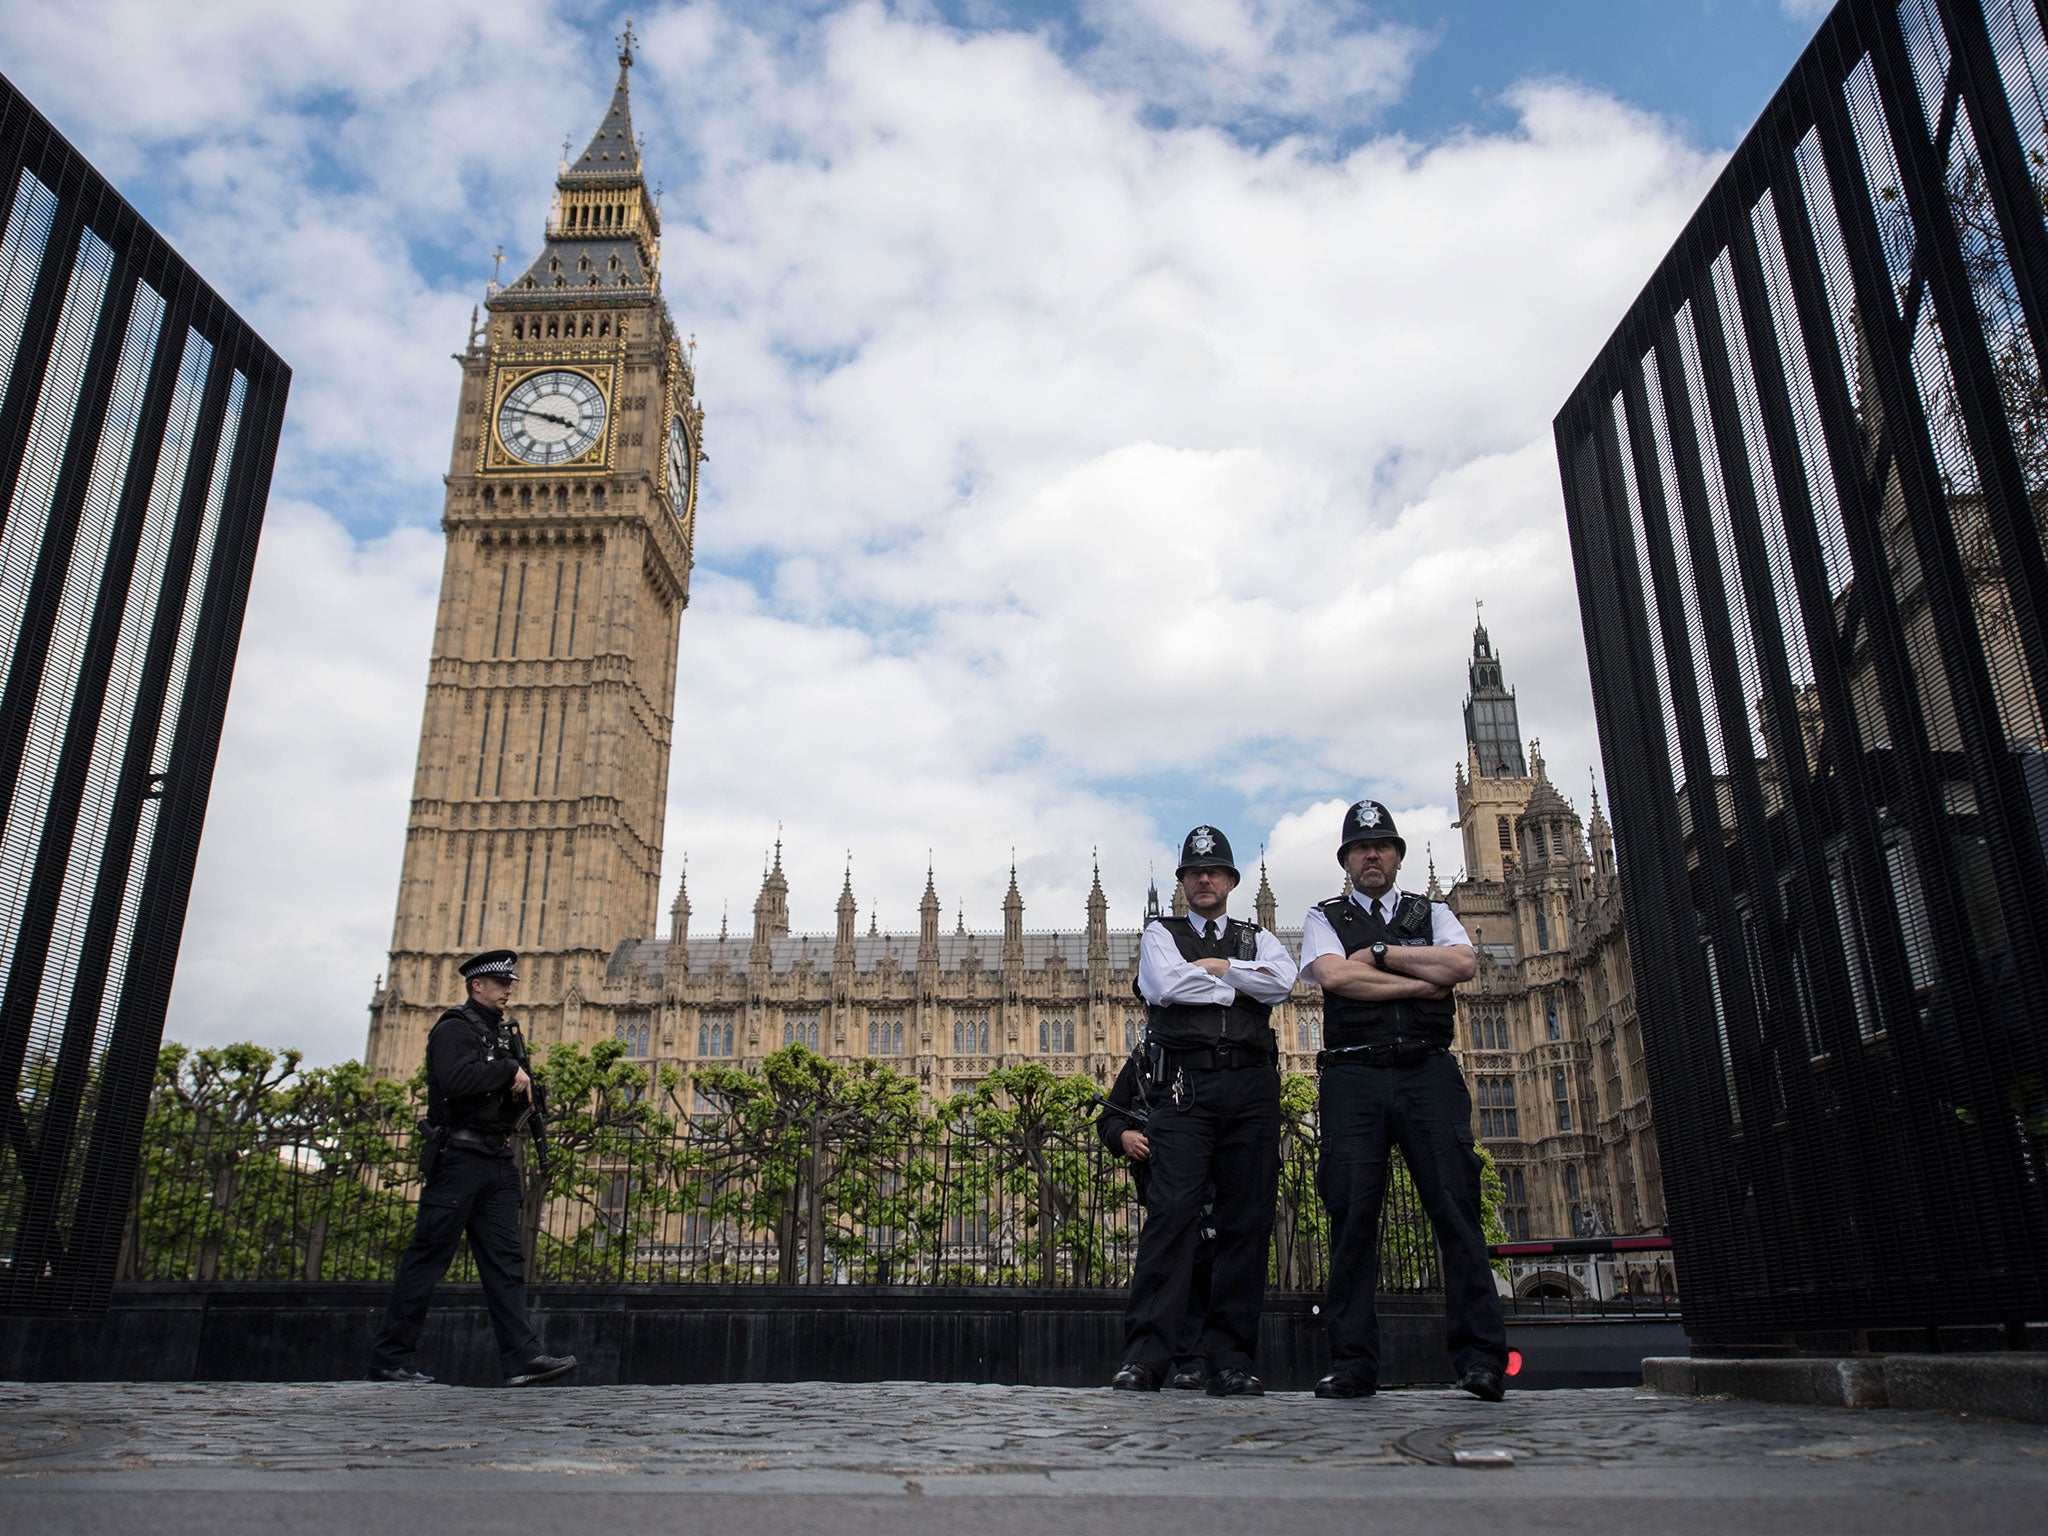 A man has been charged with lying to police about a supposed Westminster paedophile ring